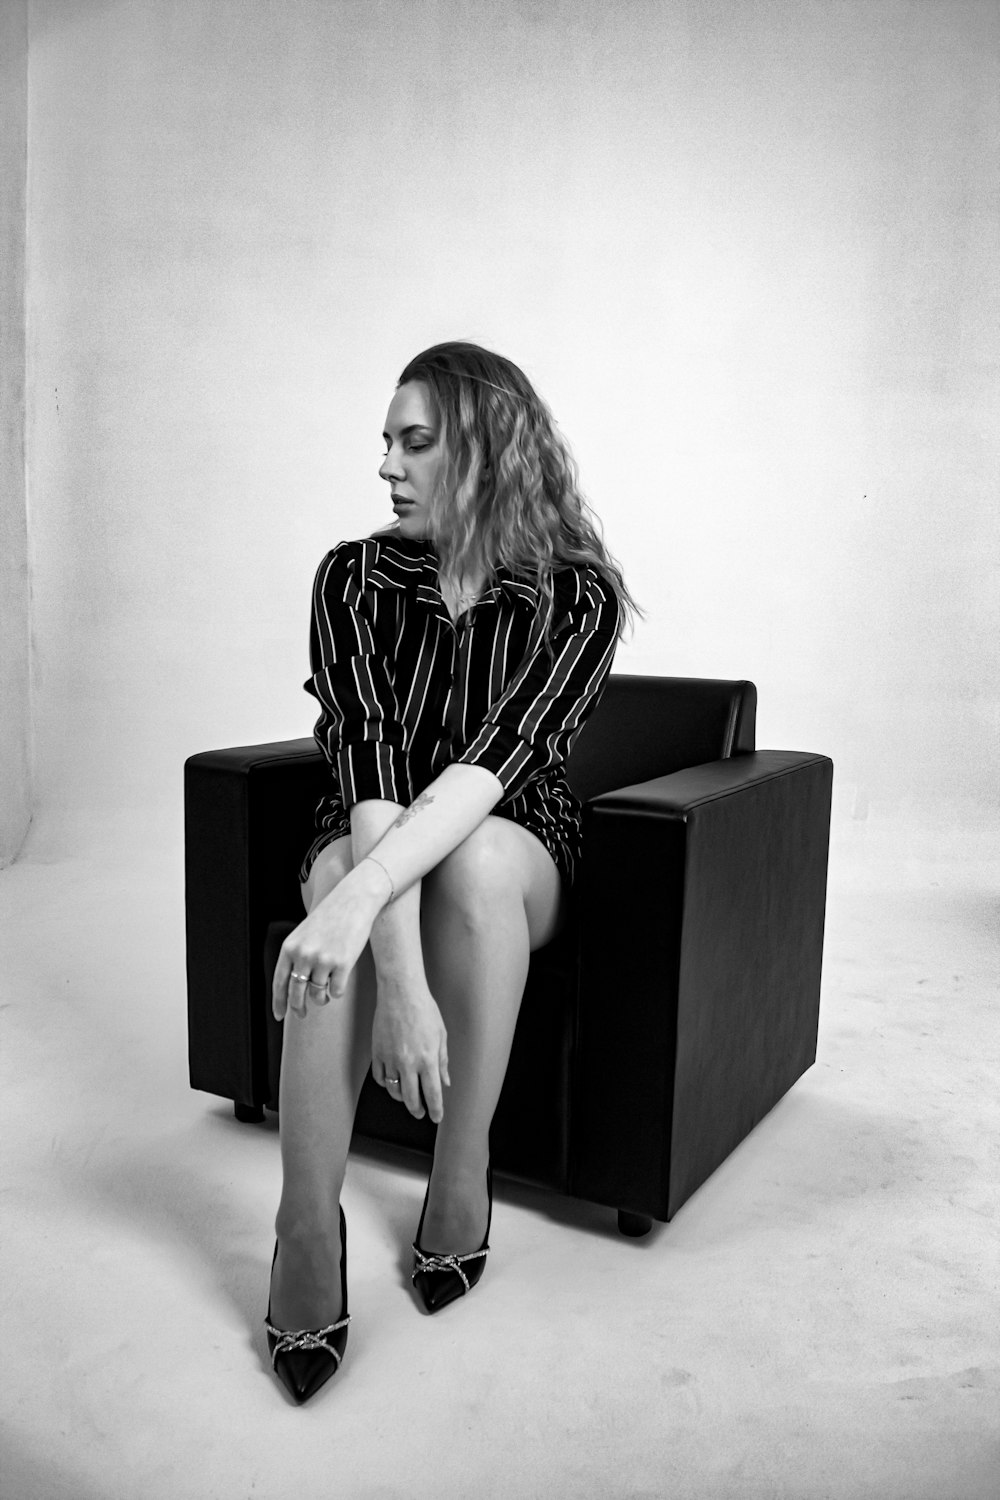 a black and white photo of a woman sitting on a chair